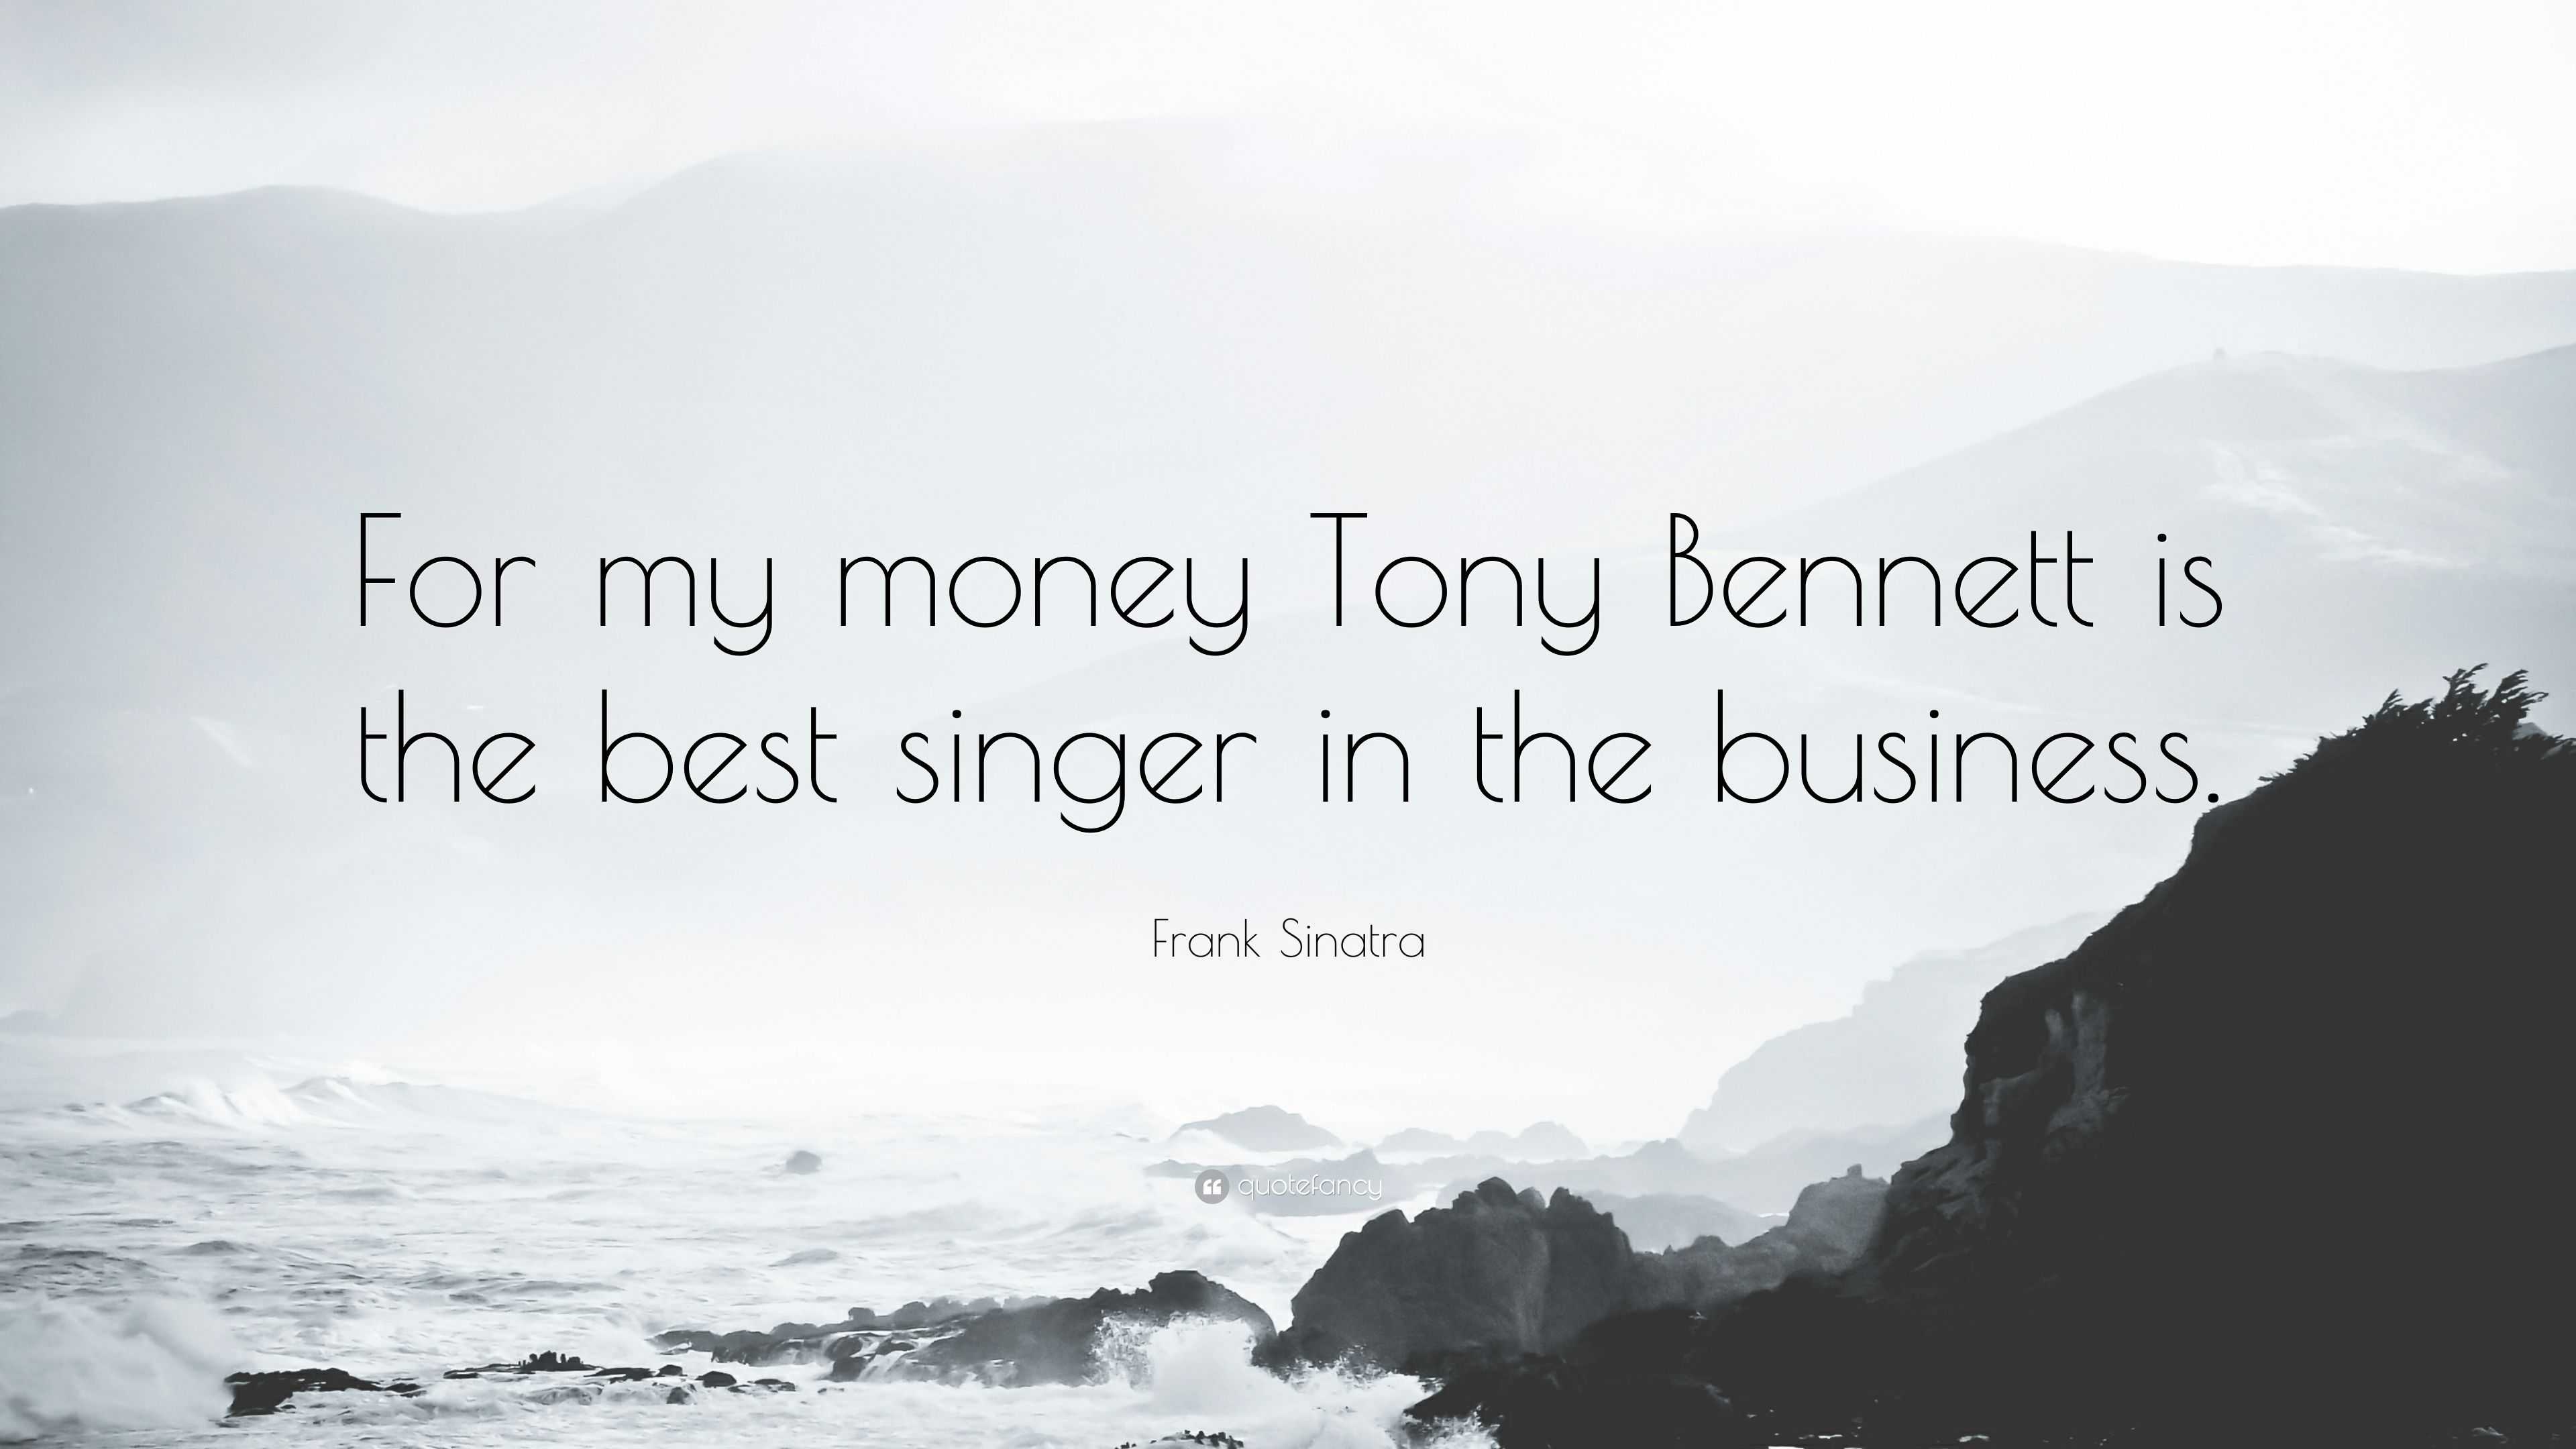 The Best Print Printable Art The Best Is Yet to Come Frank Sinatra Download Tony Bennett FRANK SINATRA QUOTE